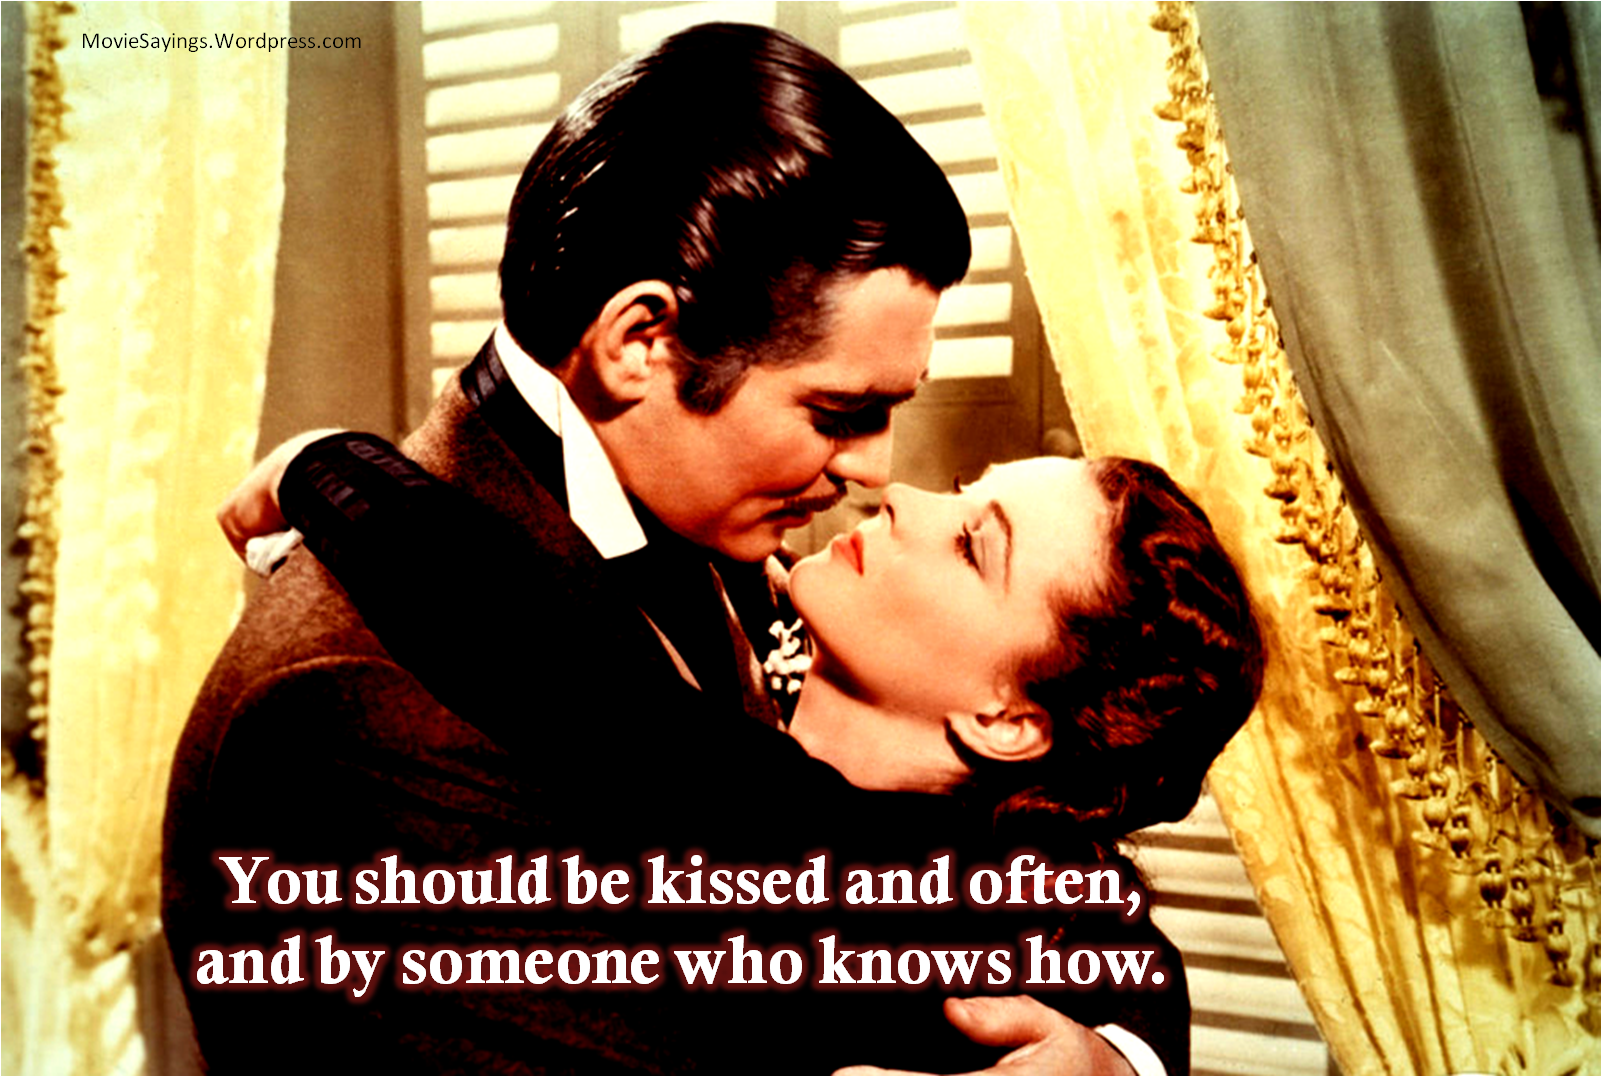 Clark Gable – Gone with the Wind (1939)